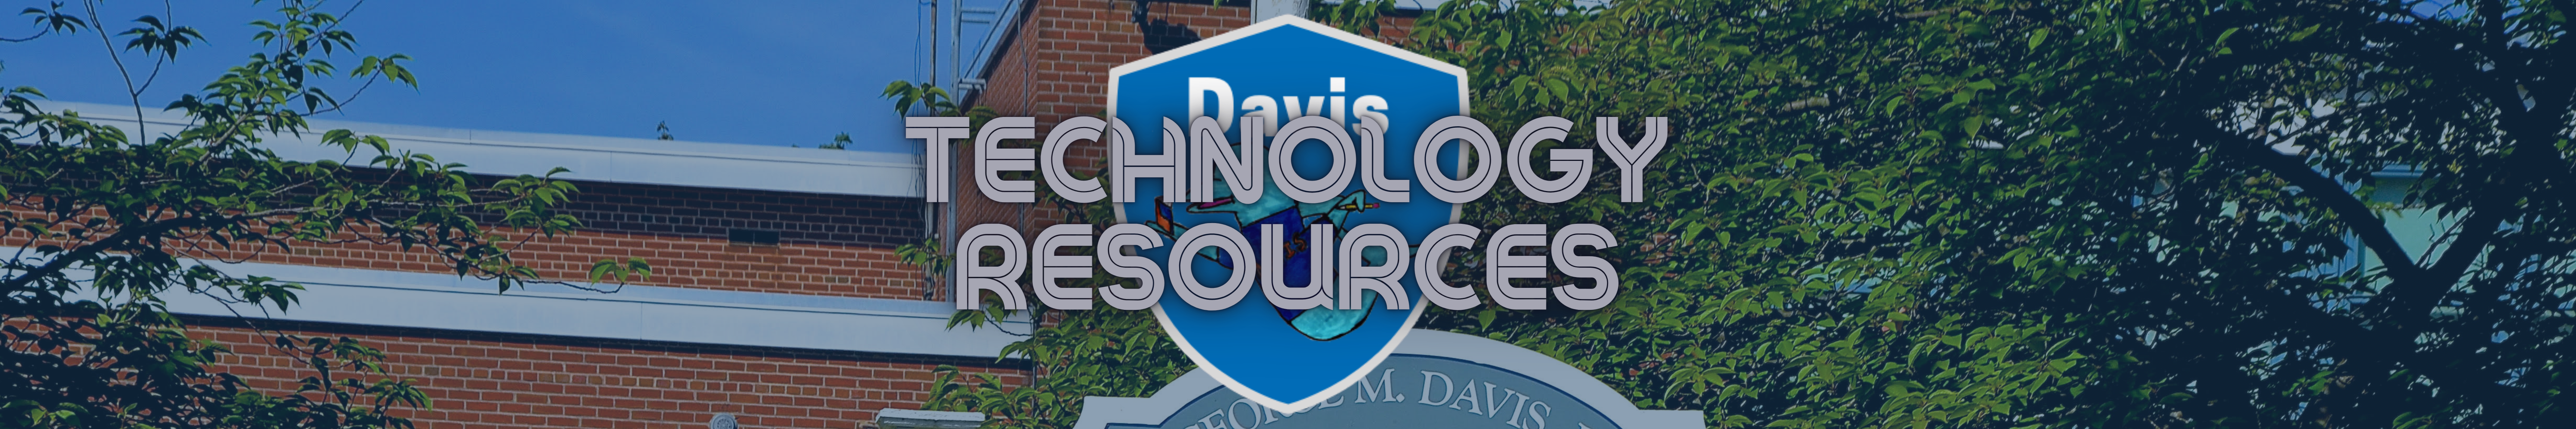 Technology Resources banner